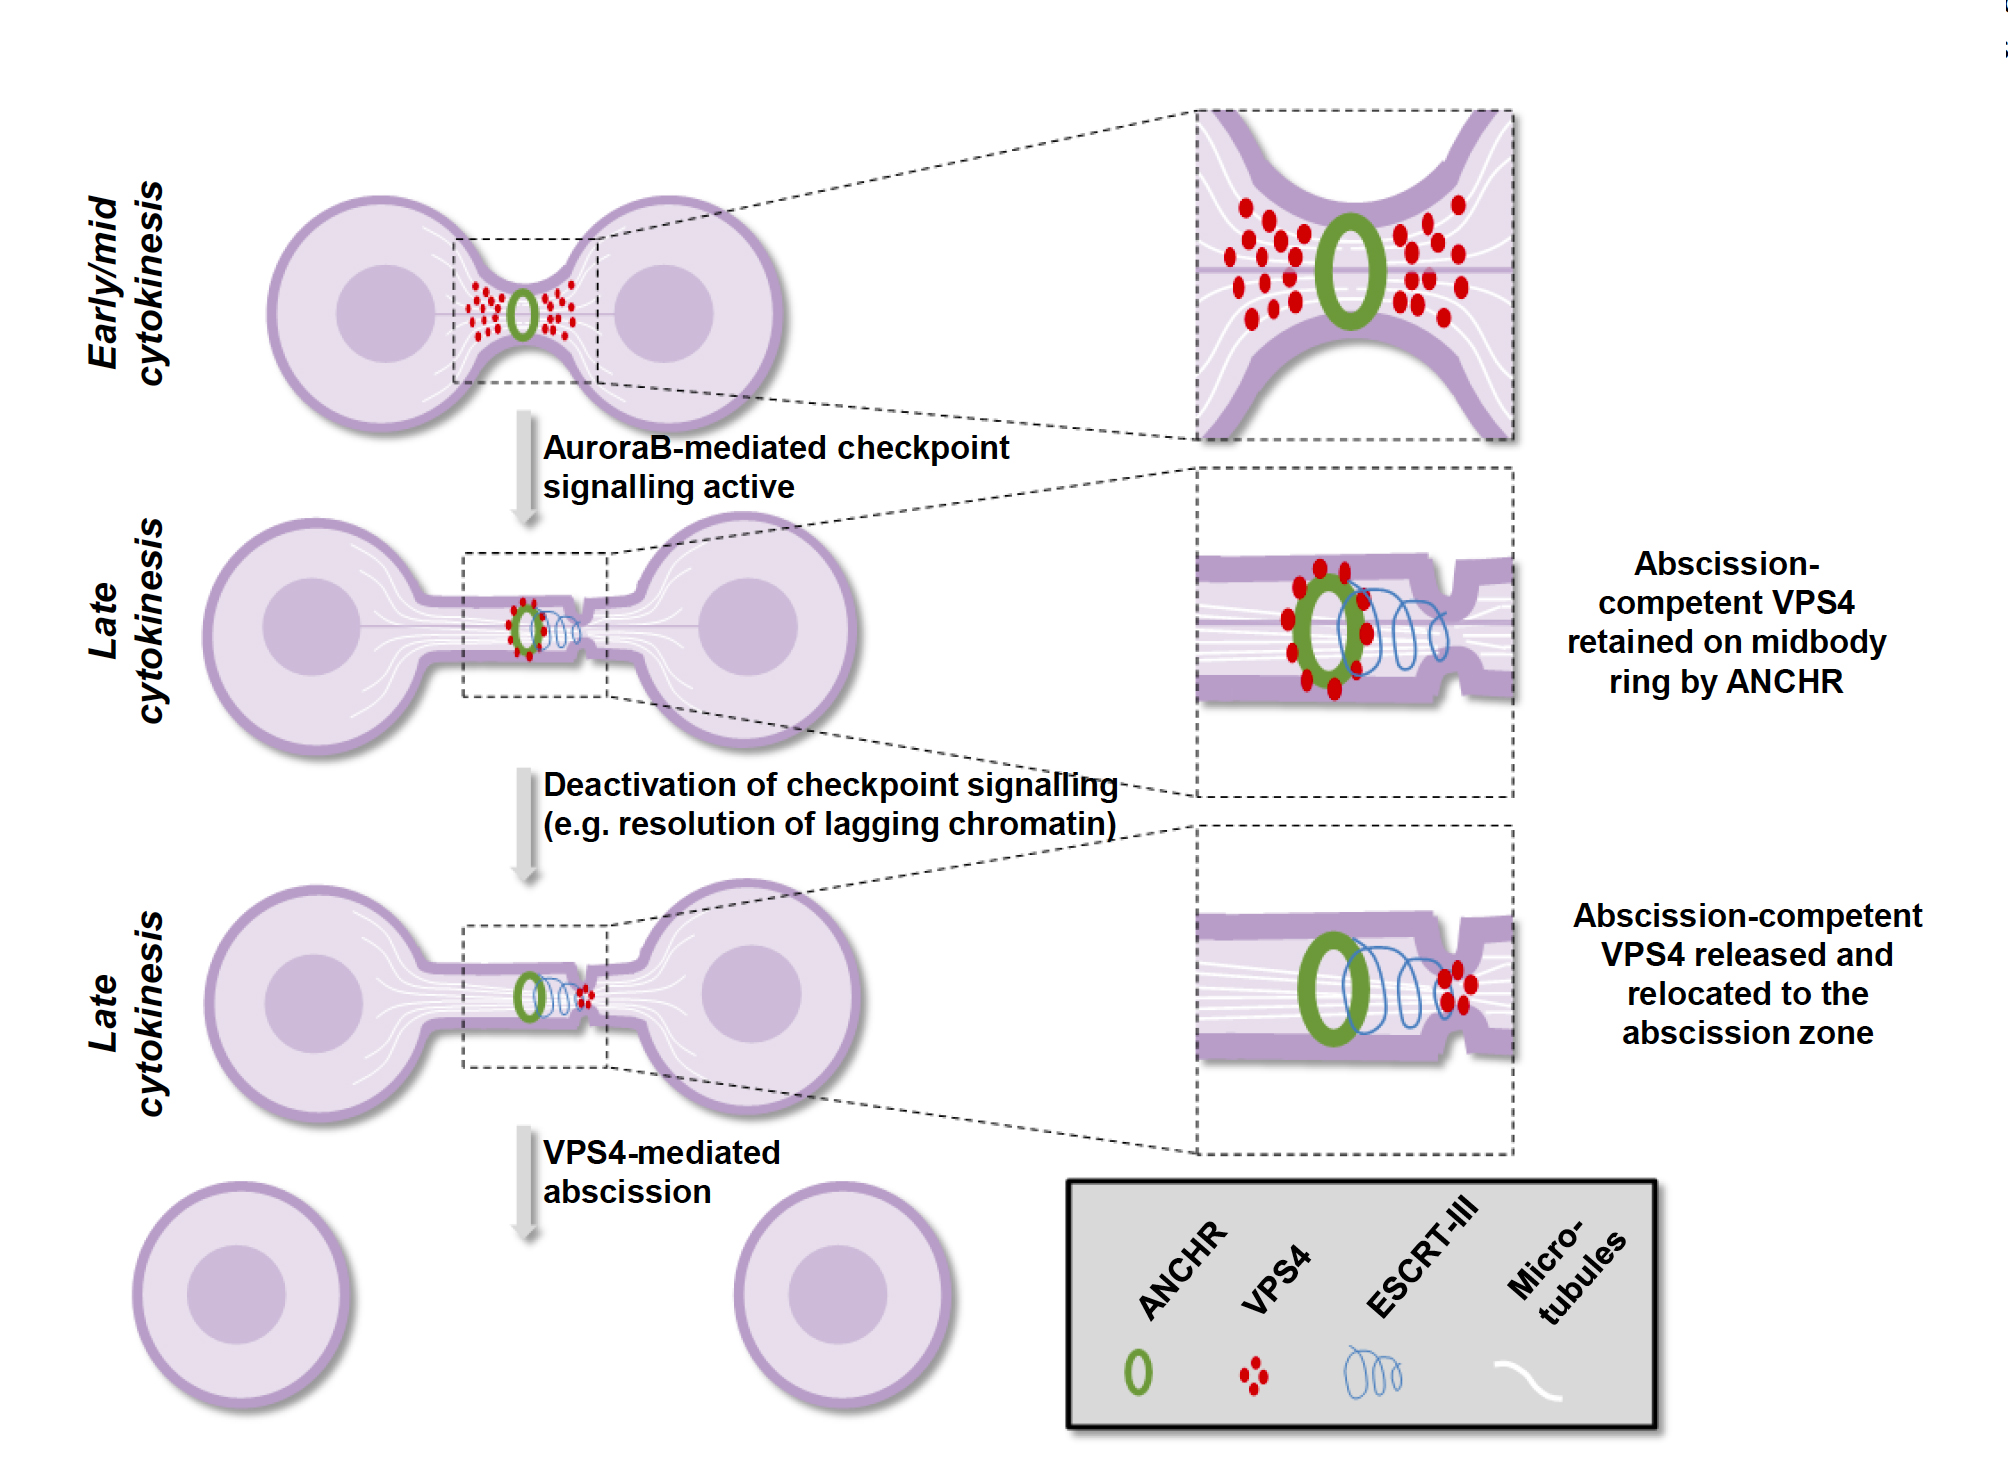 Model for the ANCHR-mediated regulation of VPS4 upon abscission checkpoint activation. At late cytokinesis, until abscission checkpoint signalling is terminated, ANCHR and CHMP4C retain abscission-competent VPS4 at the midbody ring. Upon deactivation of Aurora B, dephosphorylation of CHMP4C results in the dissociation of an ANCHR-CHMP4C-VPS4 ternary complex. This release could allow VPS4 to subsequently migrate to the abscission zone to mediate the final stages of abscission through its effects on filaments formed by ESCRT-III.